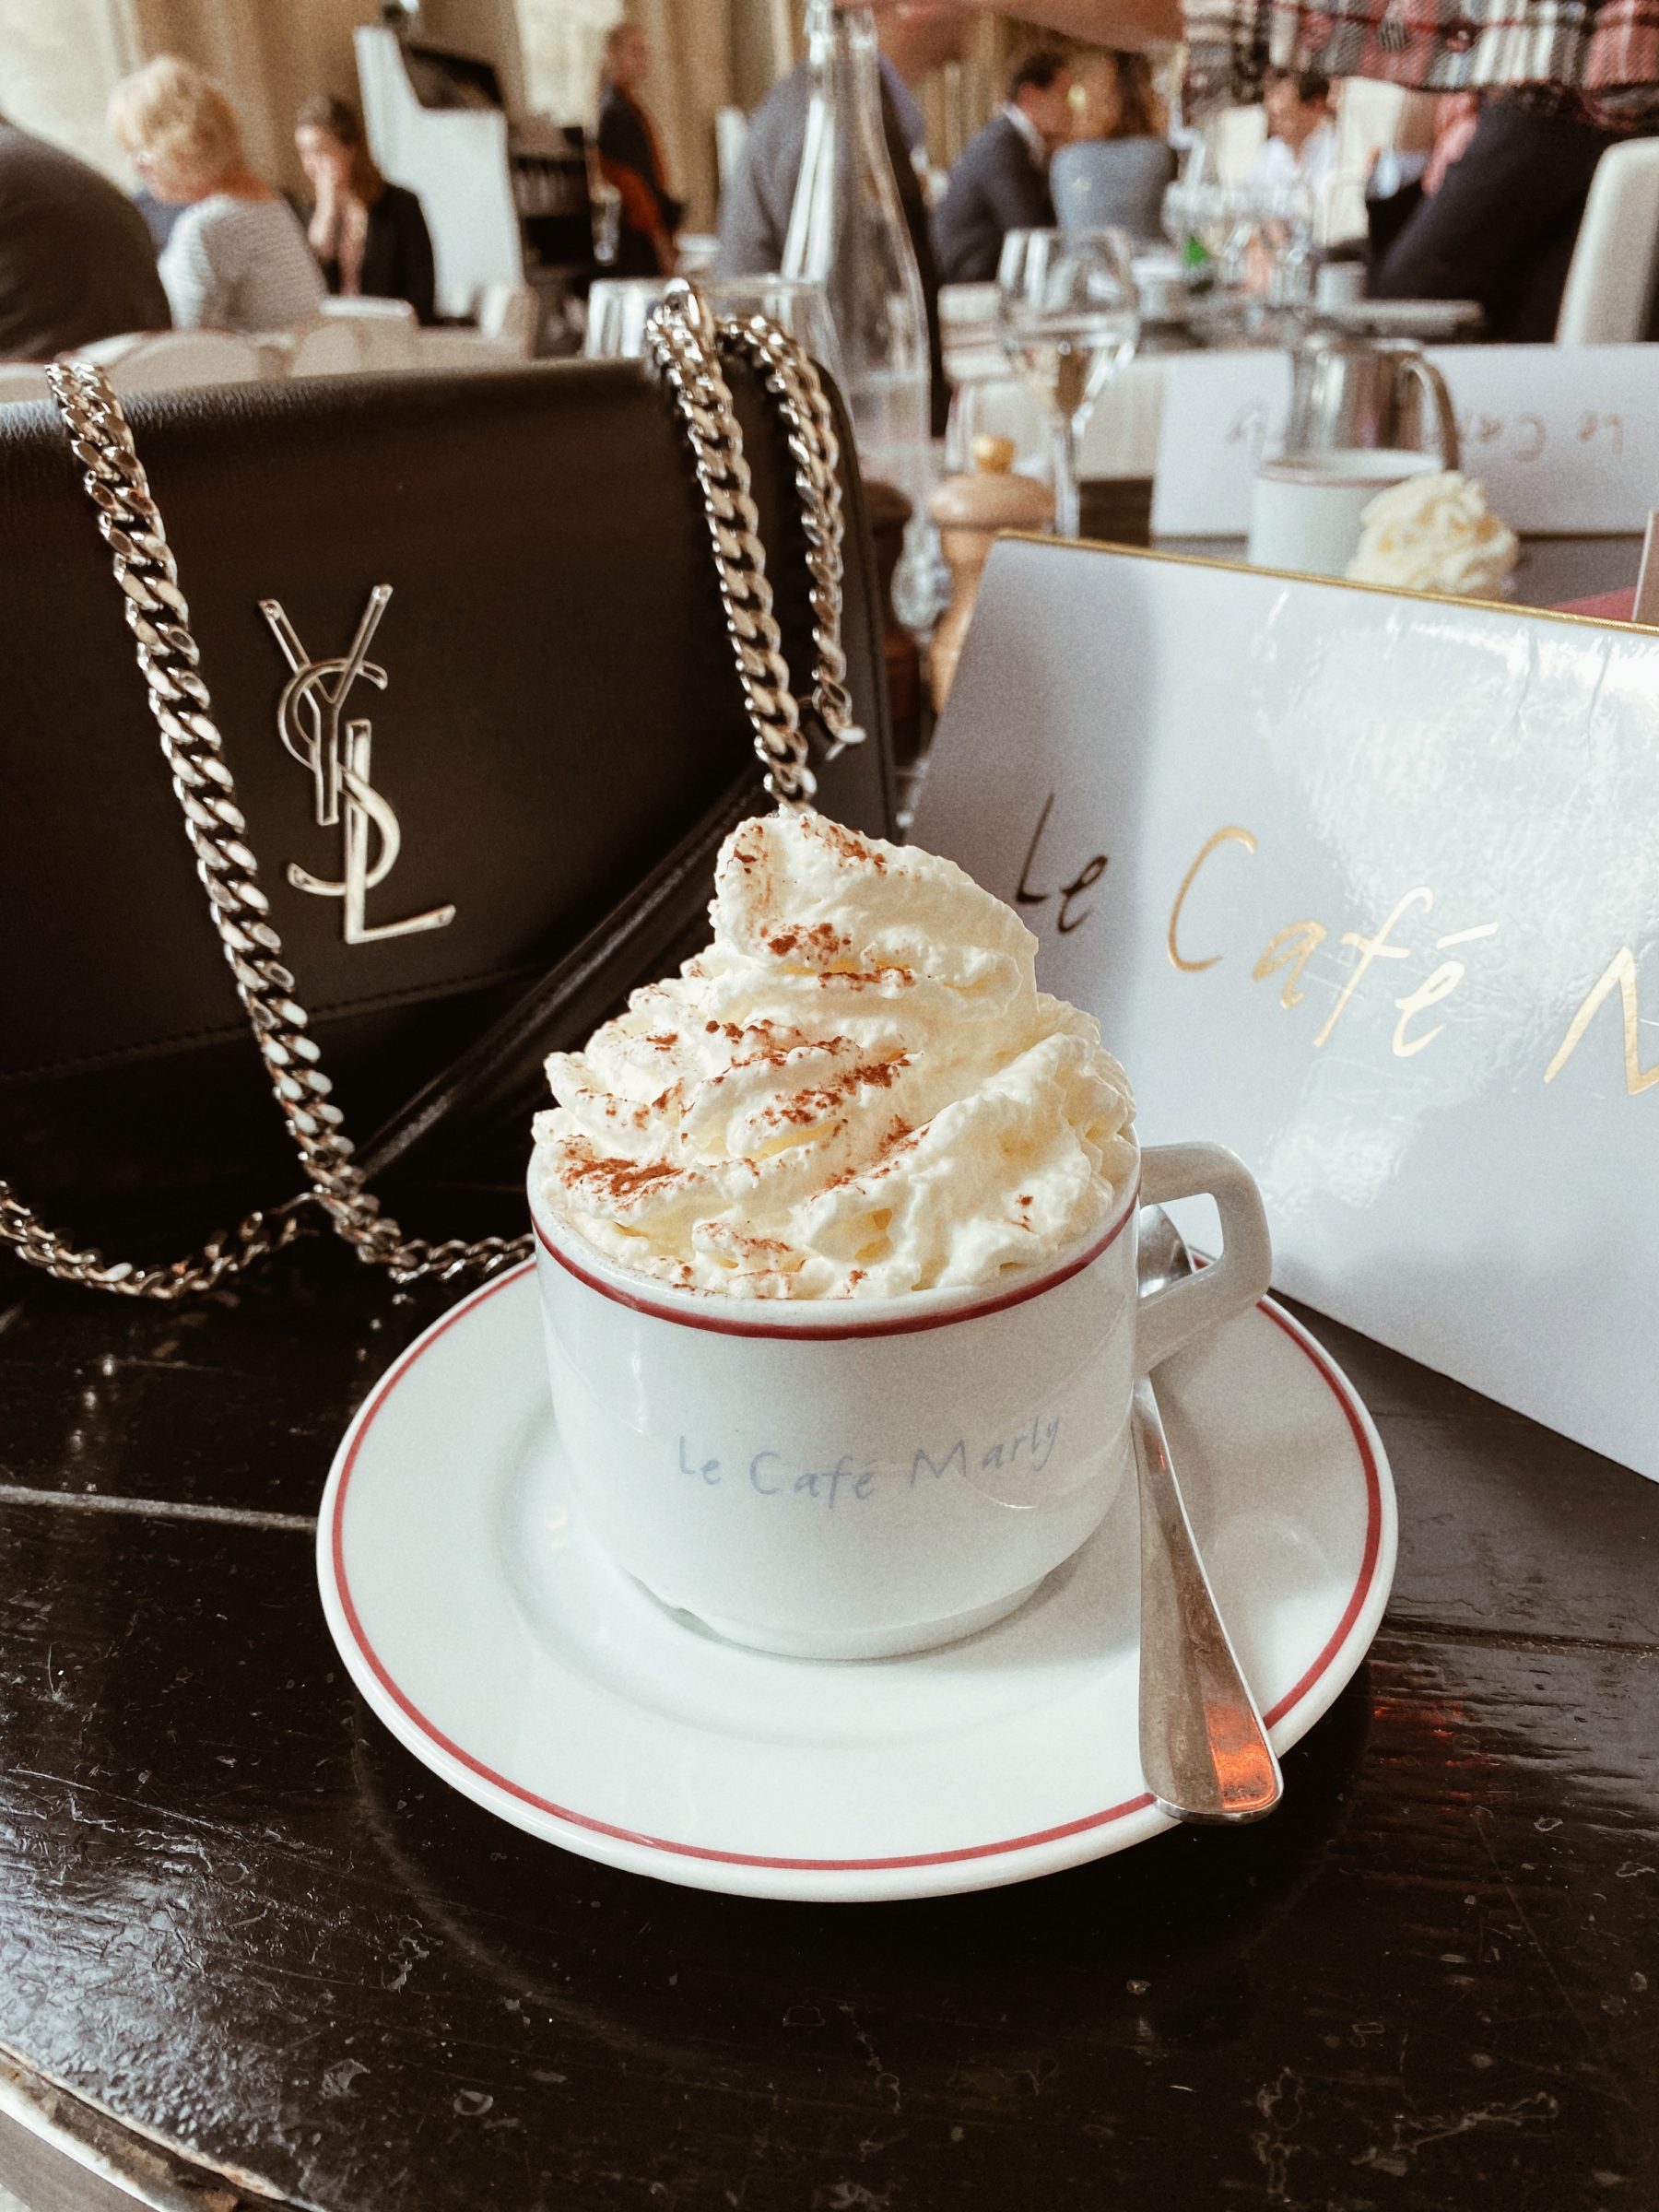 Cafes To Visit in Paris | Paris Cafes | Le Cafe Marly | Blondie in the City by Hayley Larue